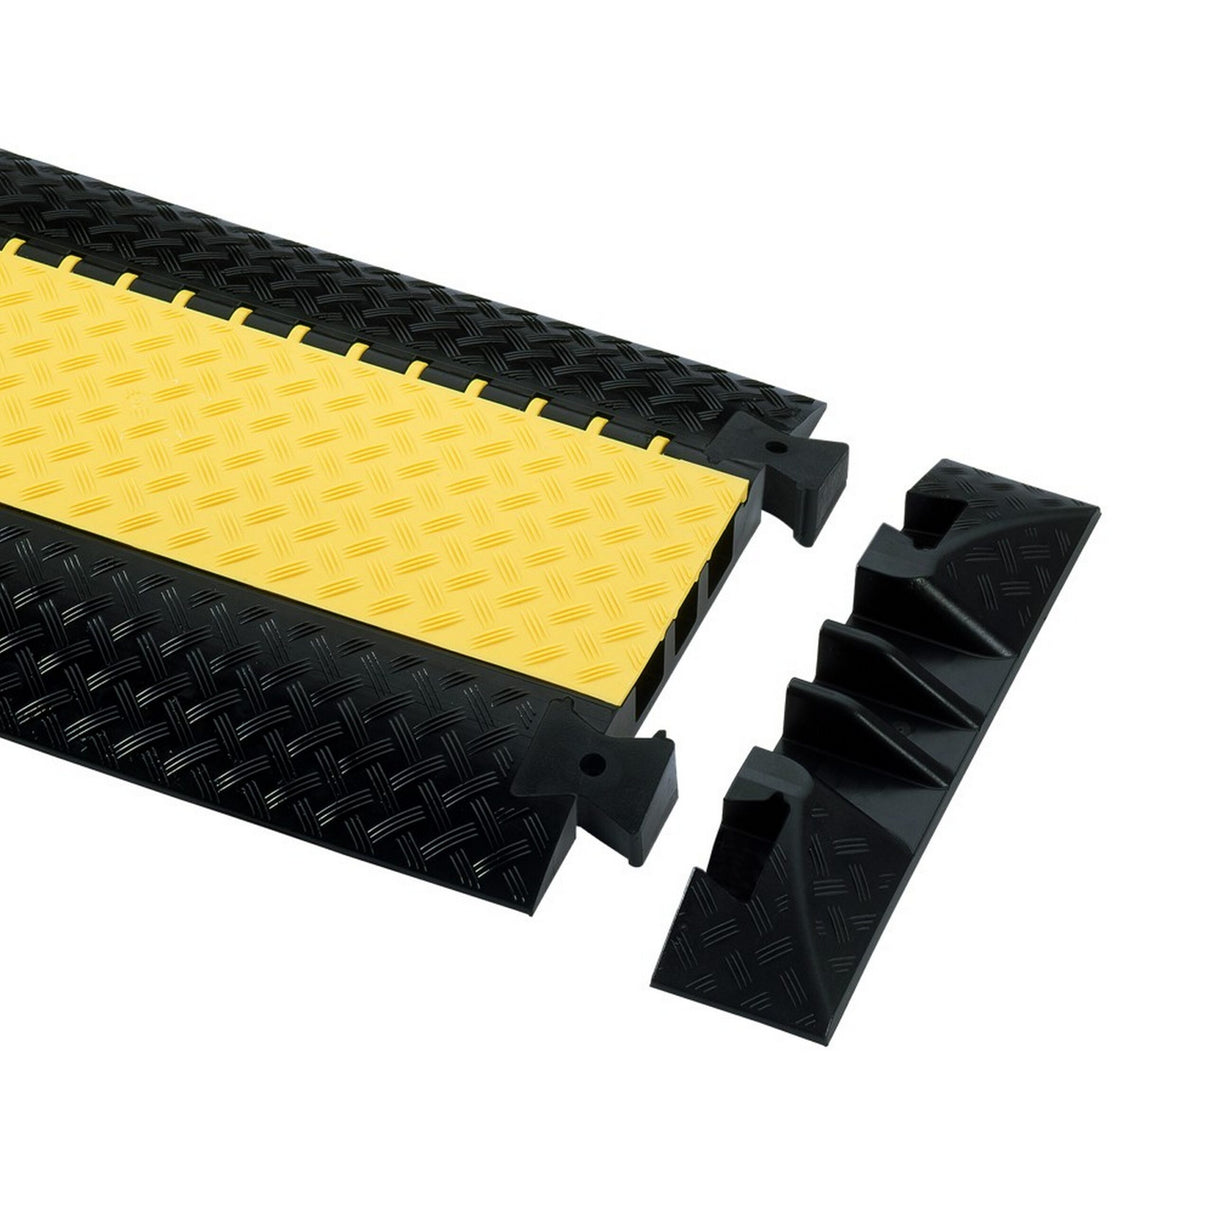 Defender 85008 3 ER End Ramp for 85002 Cable Protector